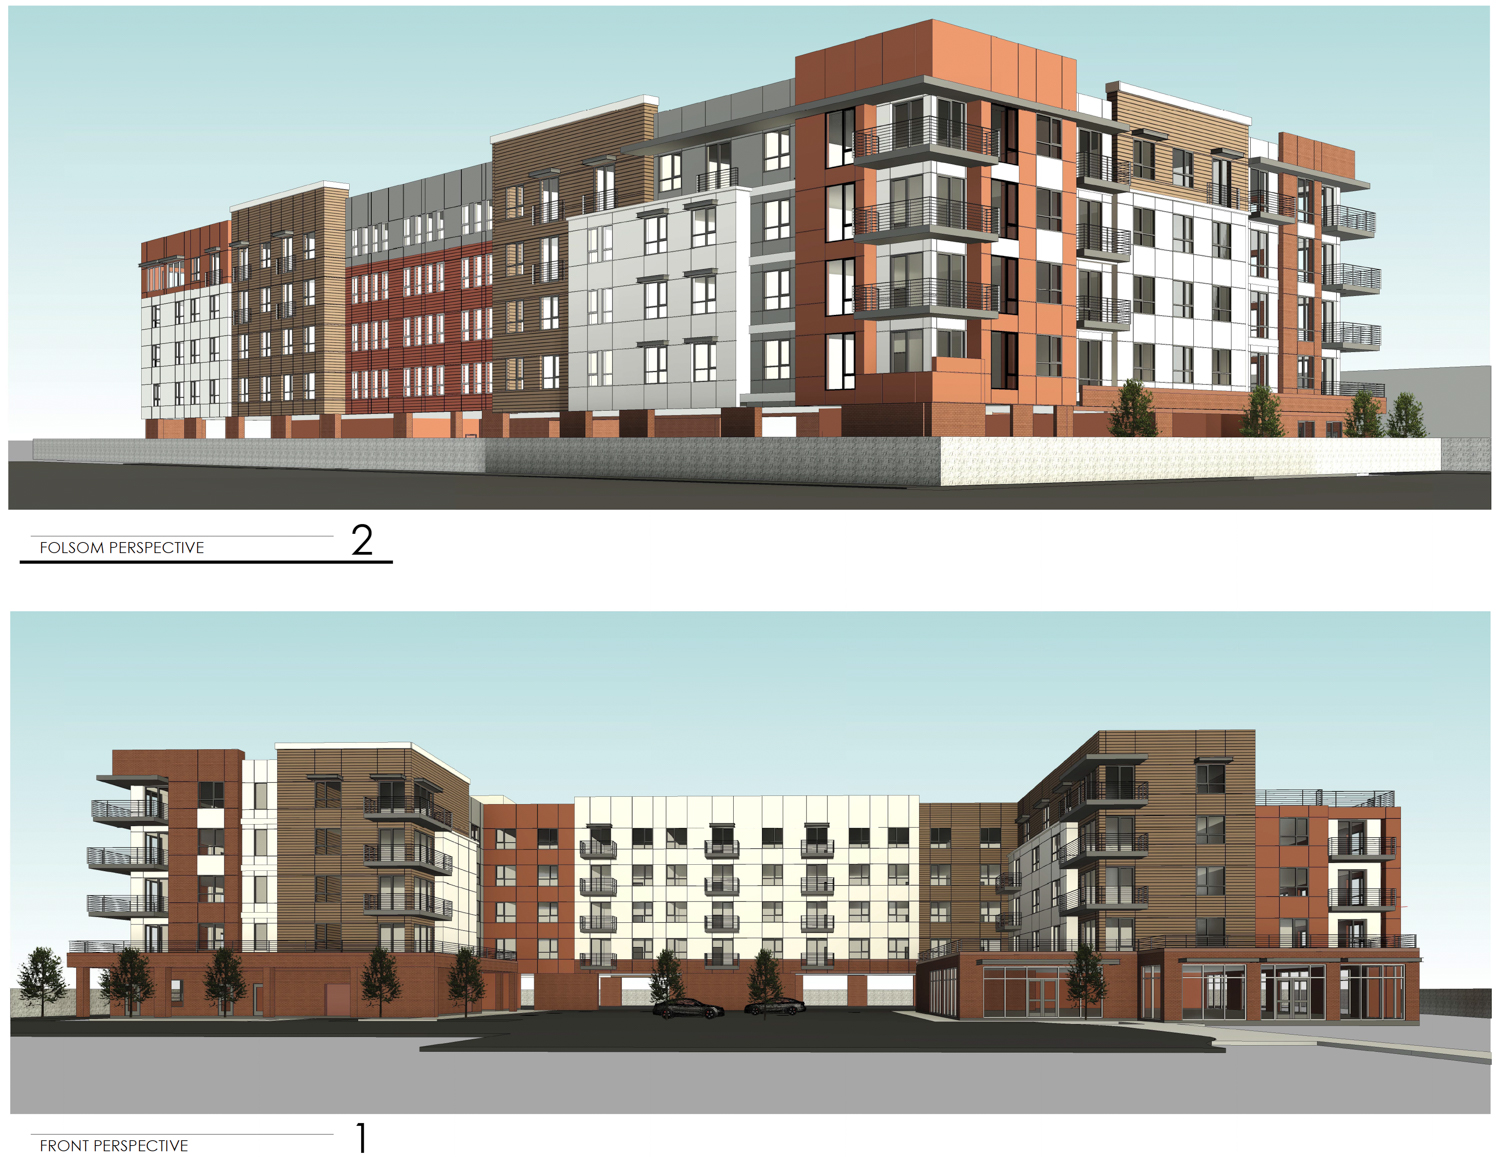 8581 Folsom Boulevard from two perspectives, rendering by HRGA